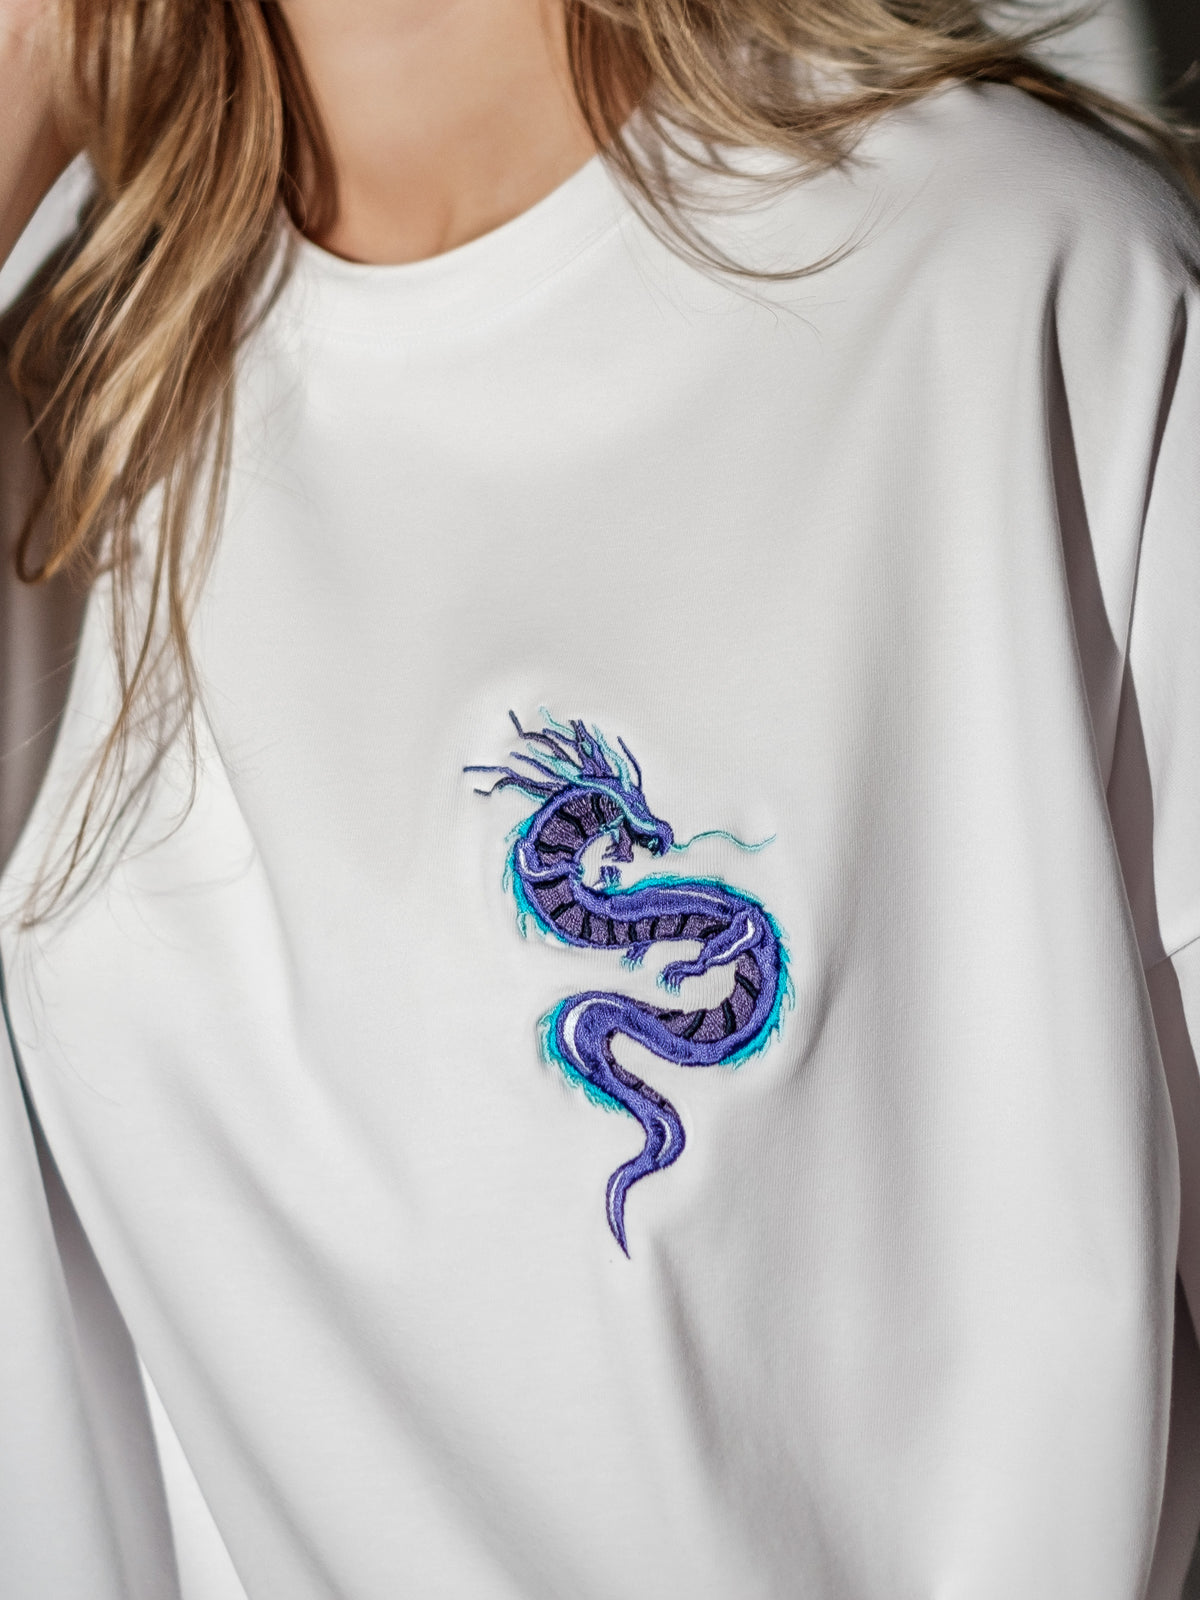 white T-shirt with dragon closeup embroidery